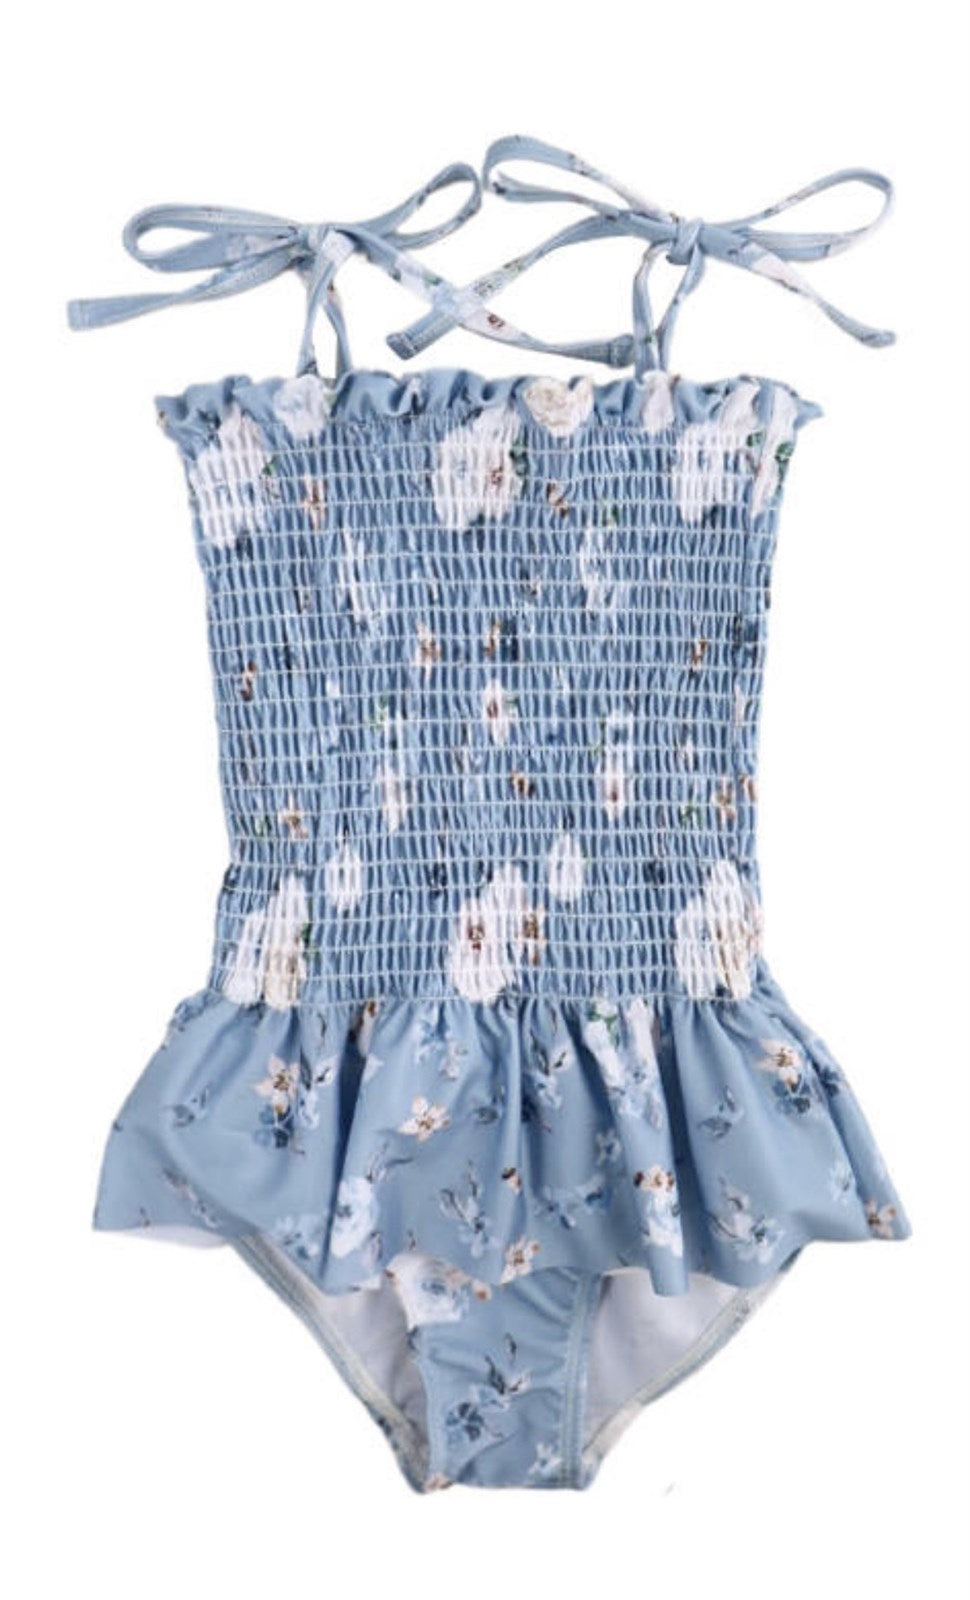 Girls Swimsuits - Country Blue Floral - 1 Pc Accordion